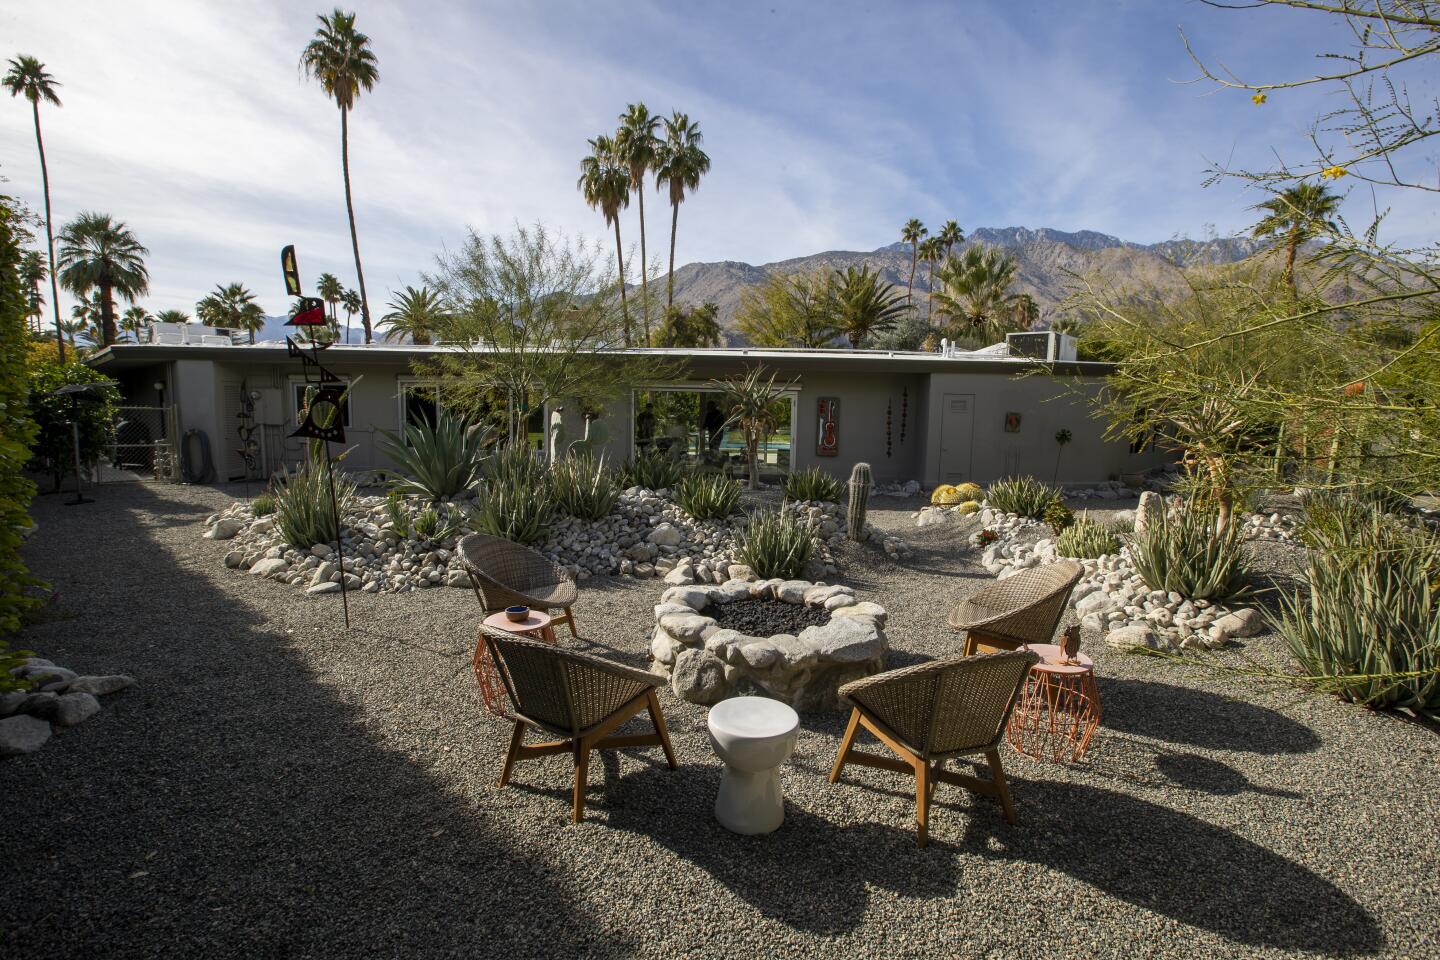 The Lawrence Welk estate in Palm Springs